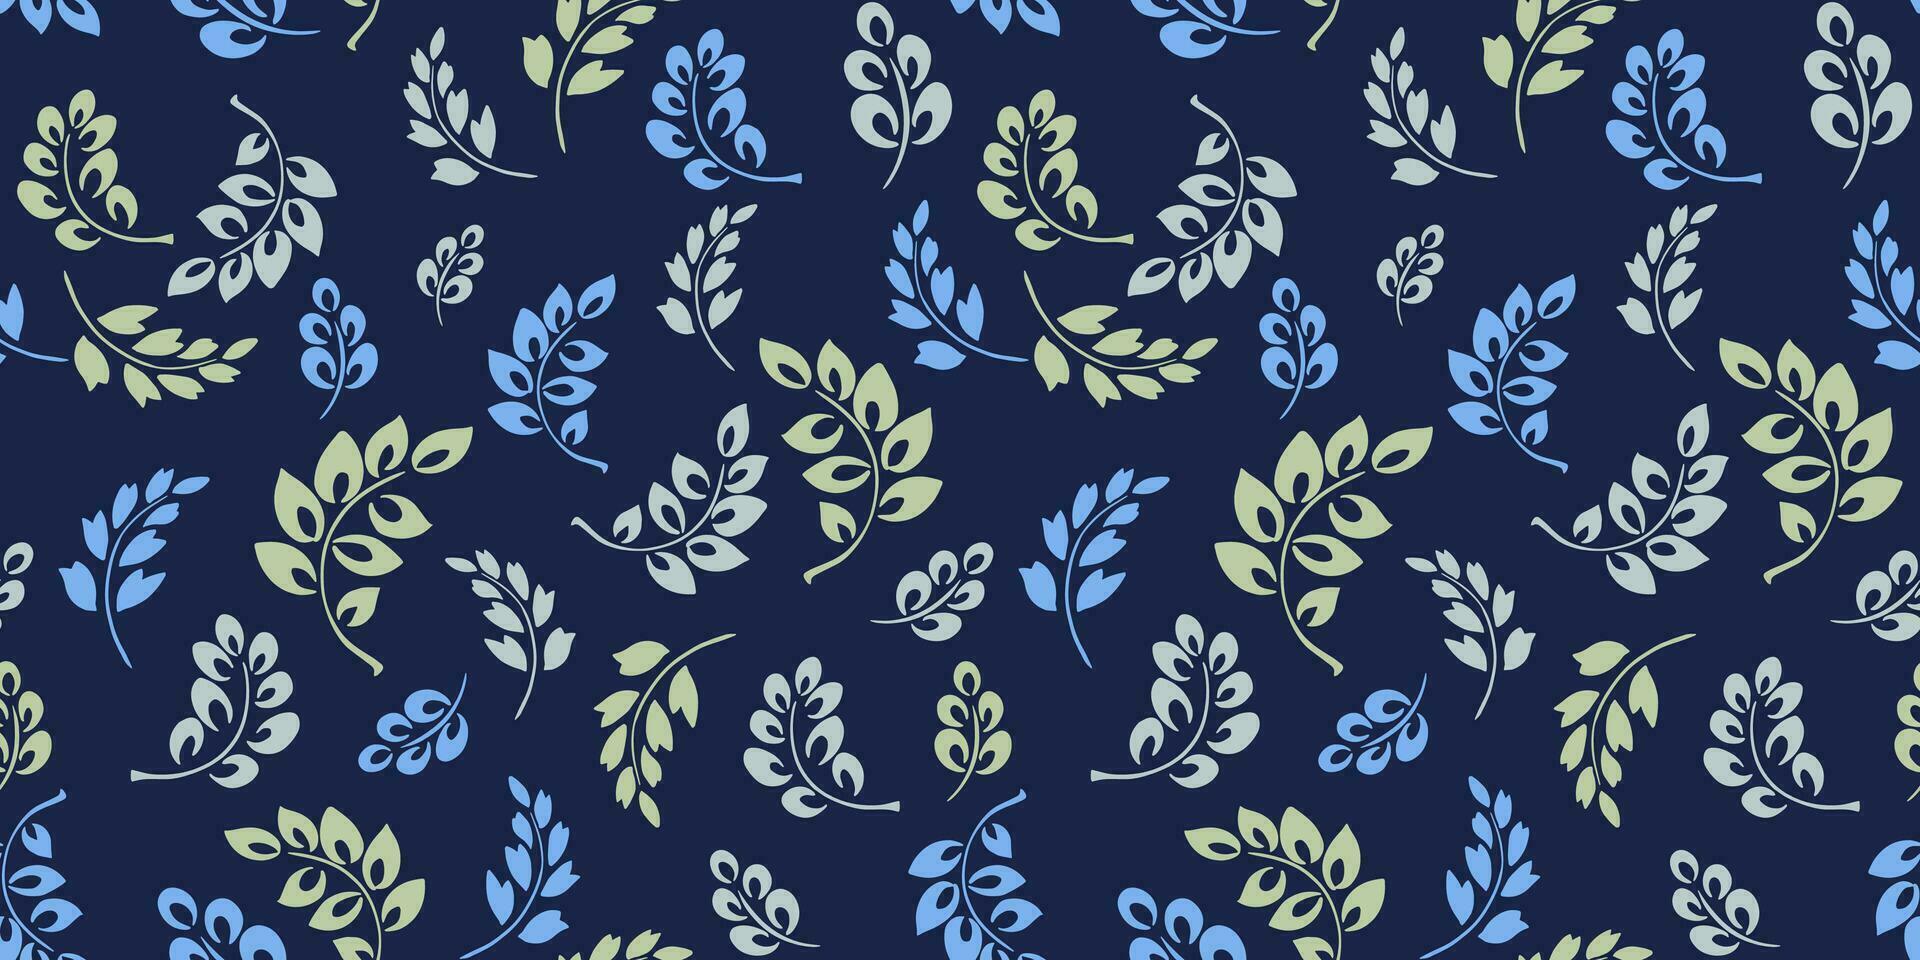 Seamless pattern with vector hand drawn tiny leaves branches, drops. Creative simple abstract floral print on a dark blue background. Template for design fashion, fabric, textile, wallpaper